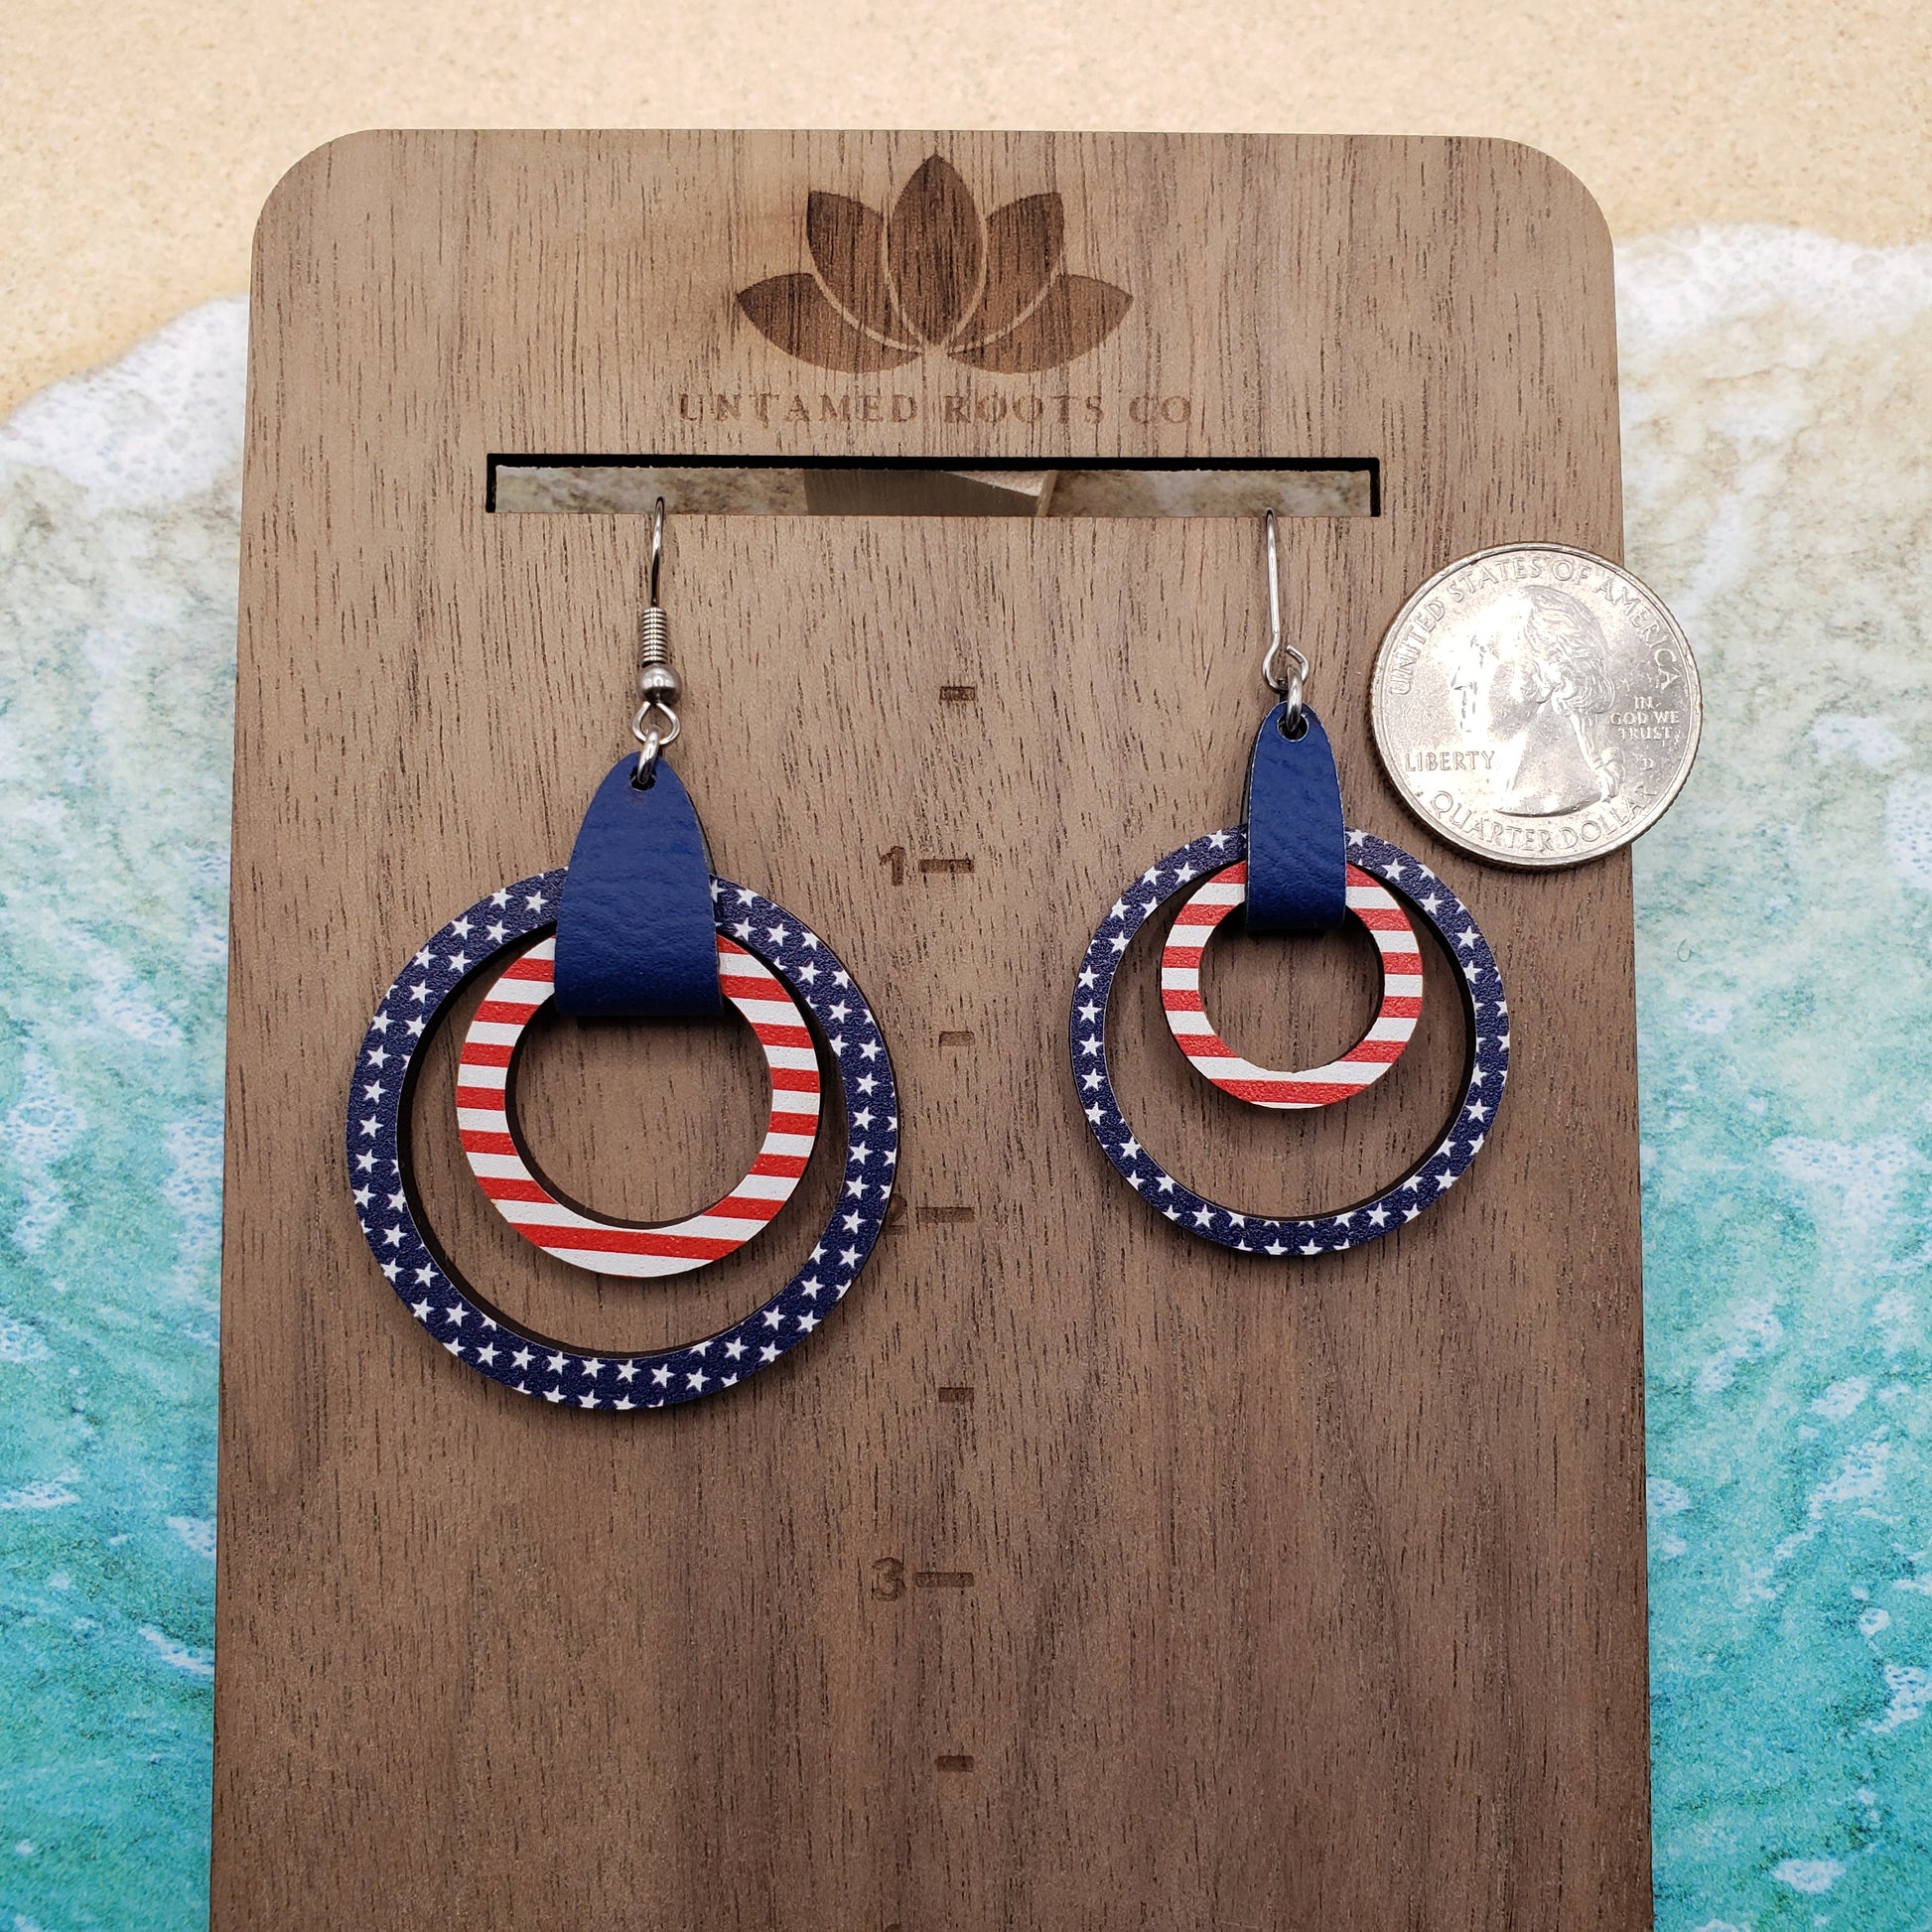 Stars and stripes circle earrings